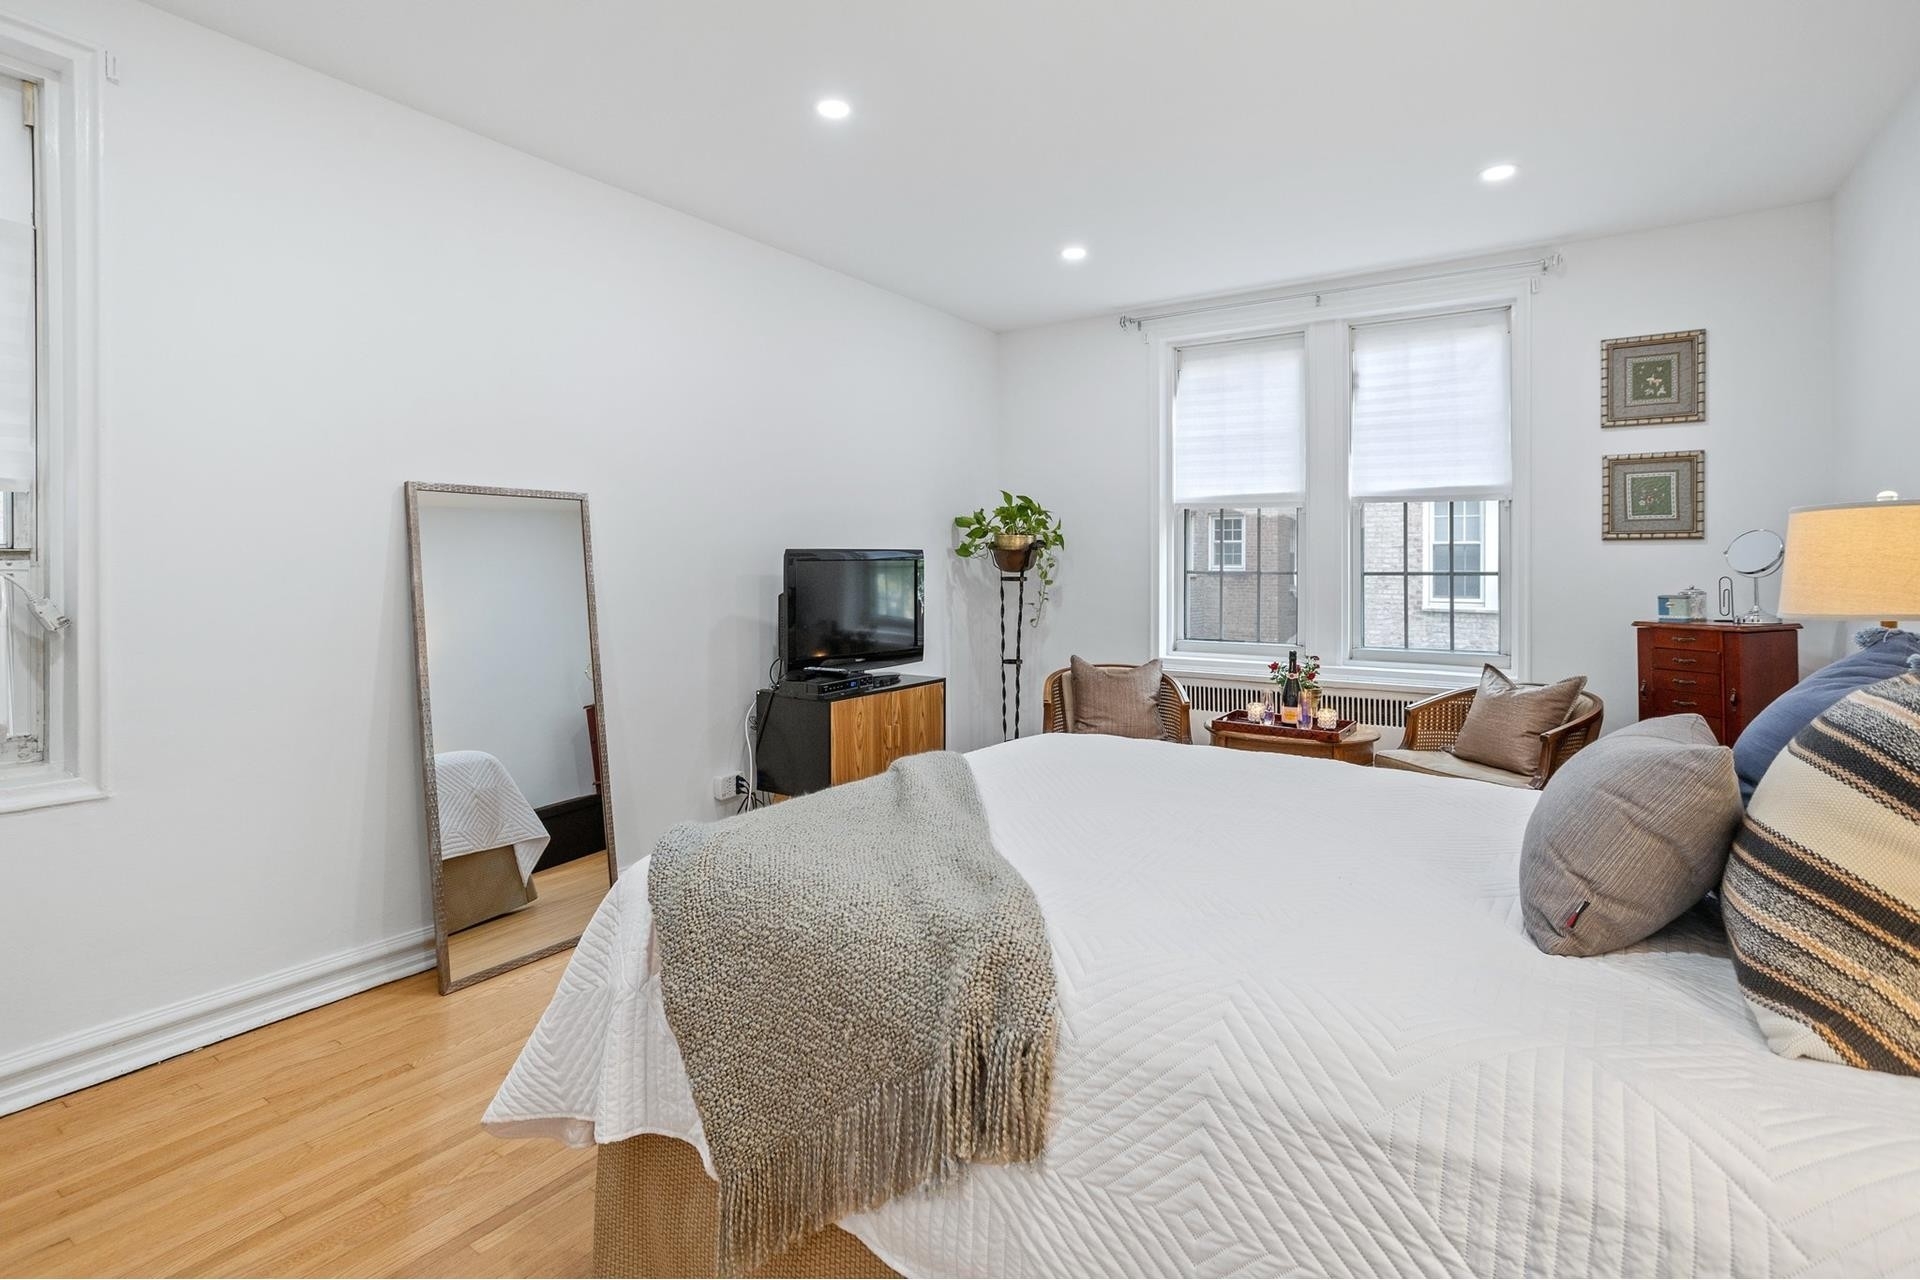 Co-op Properties for Sale at 360 CLINTON AVE, 3D Clinton Hill, Brooklyn, NY 11238